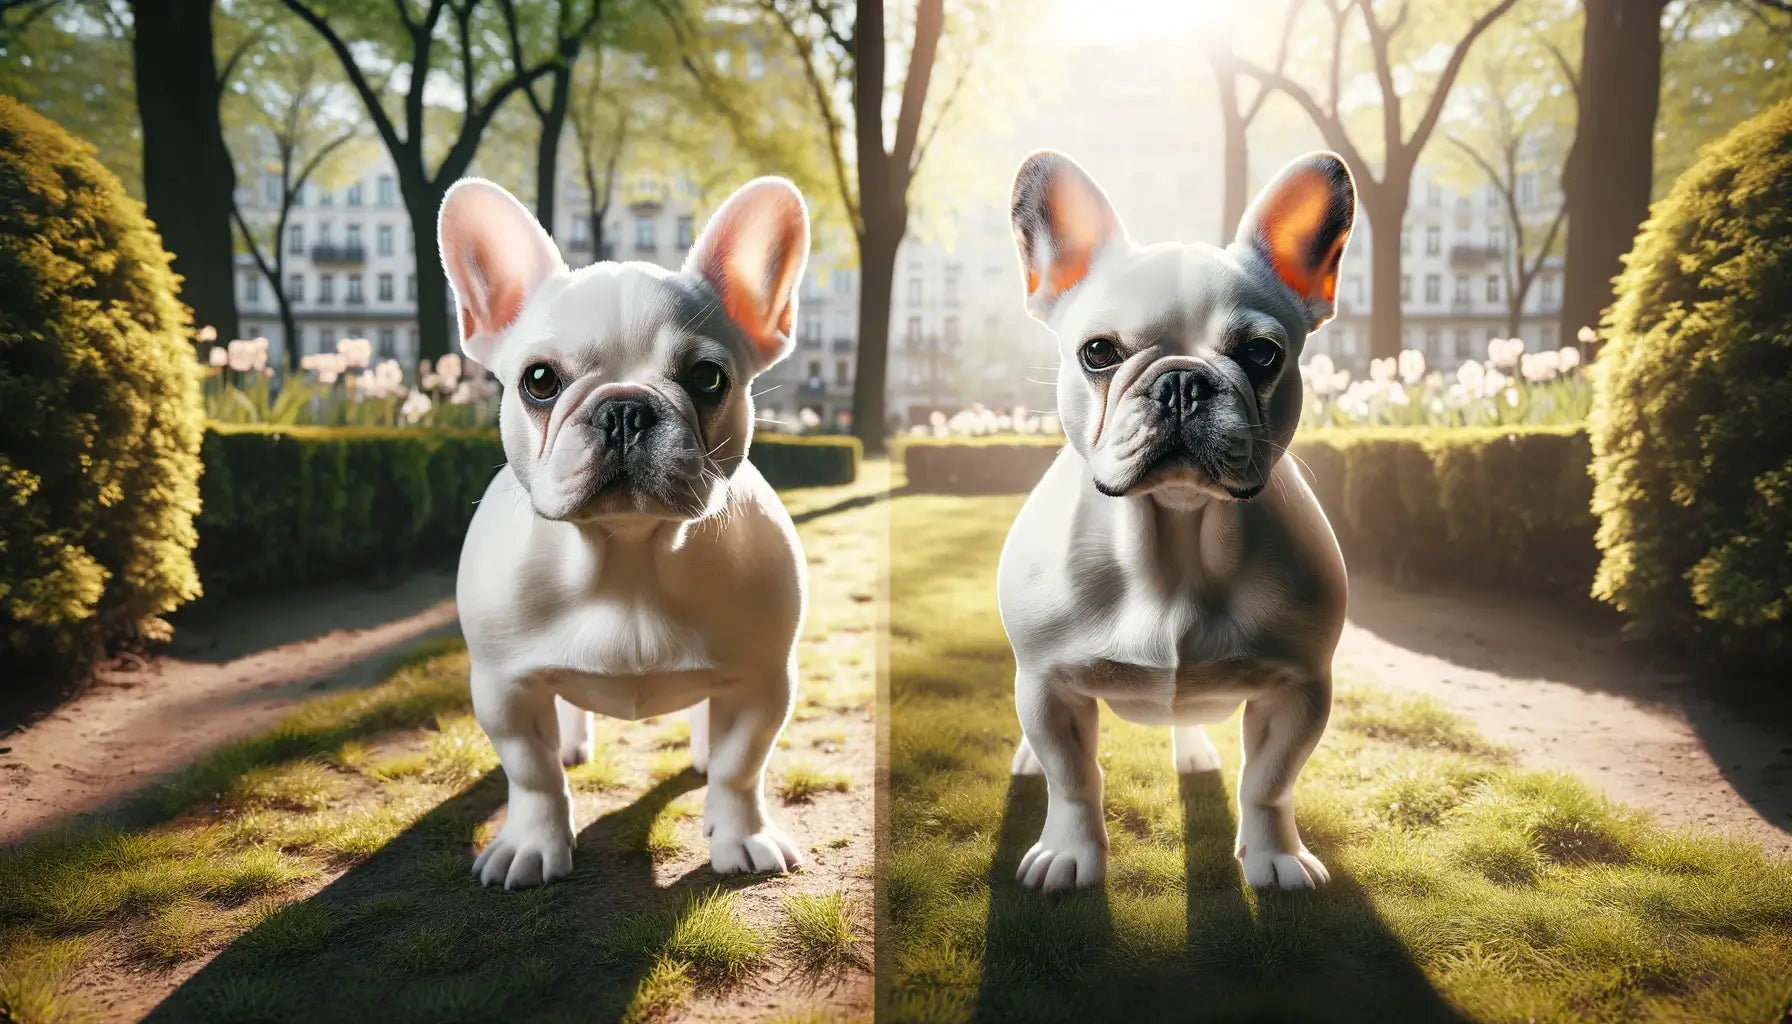 White French Bulldog male and female in a sunny park setting.